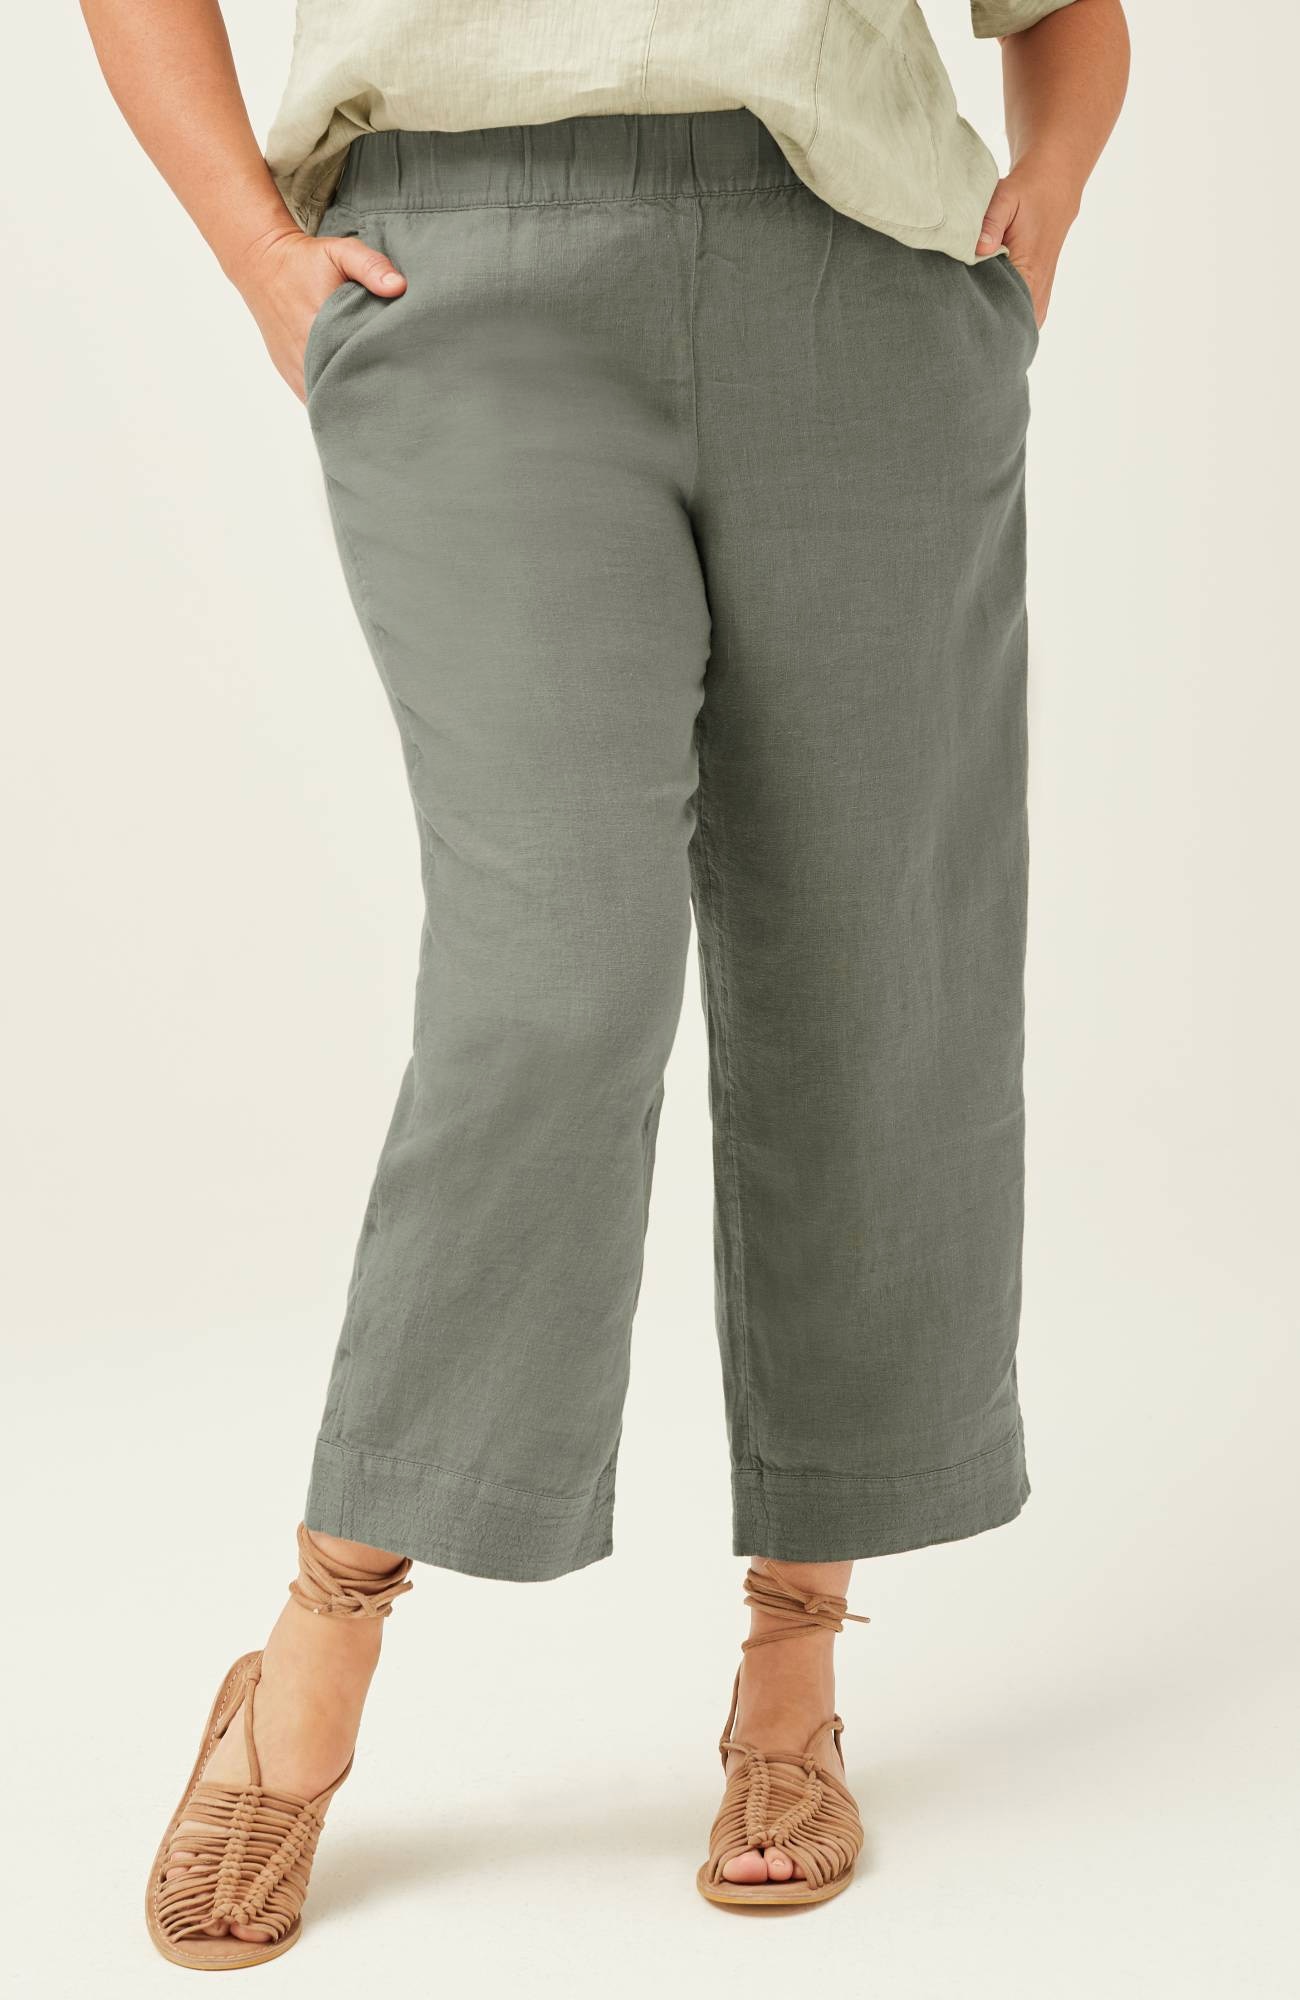 Linen-Blend High-Waist Pull-On Pant in Pants & Shorts